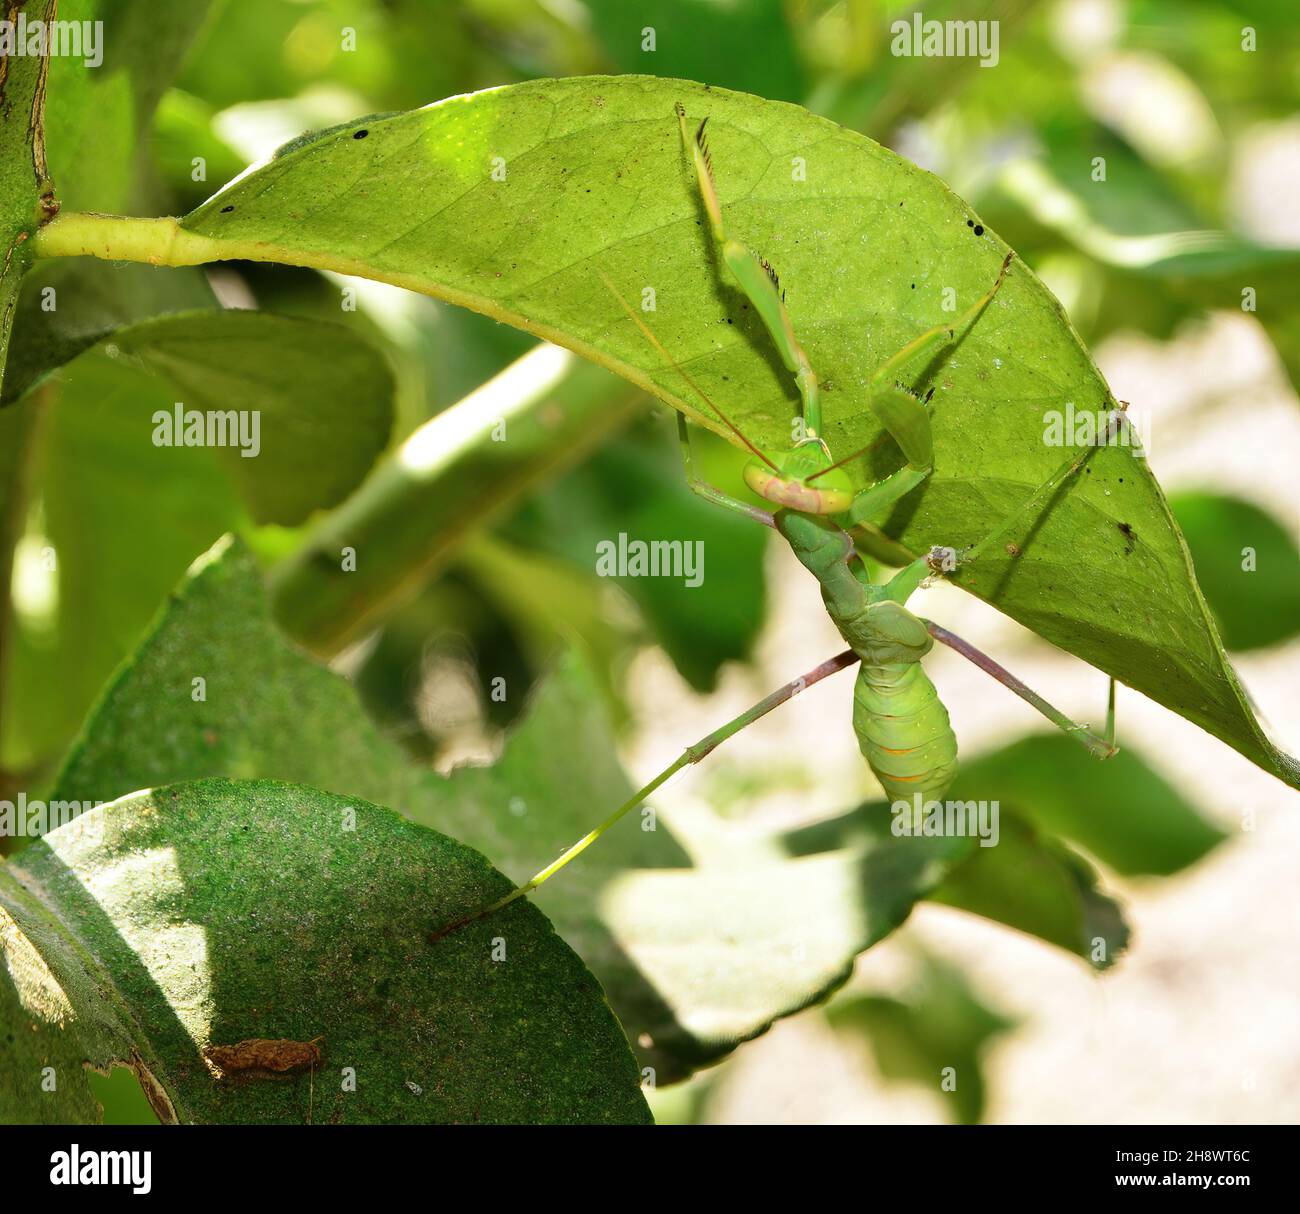 green preying mantis hunting in a tree Stock Photo